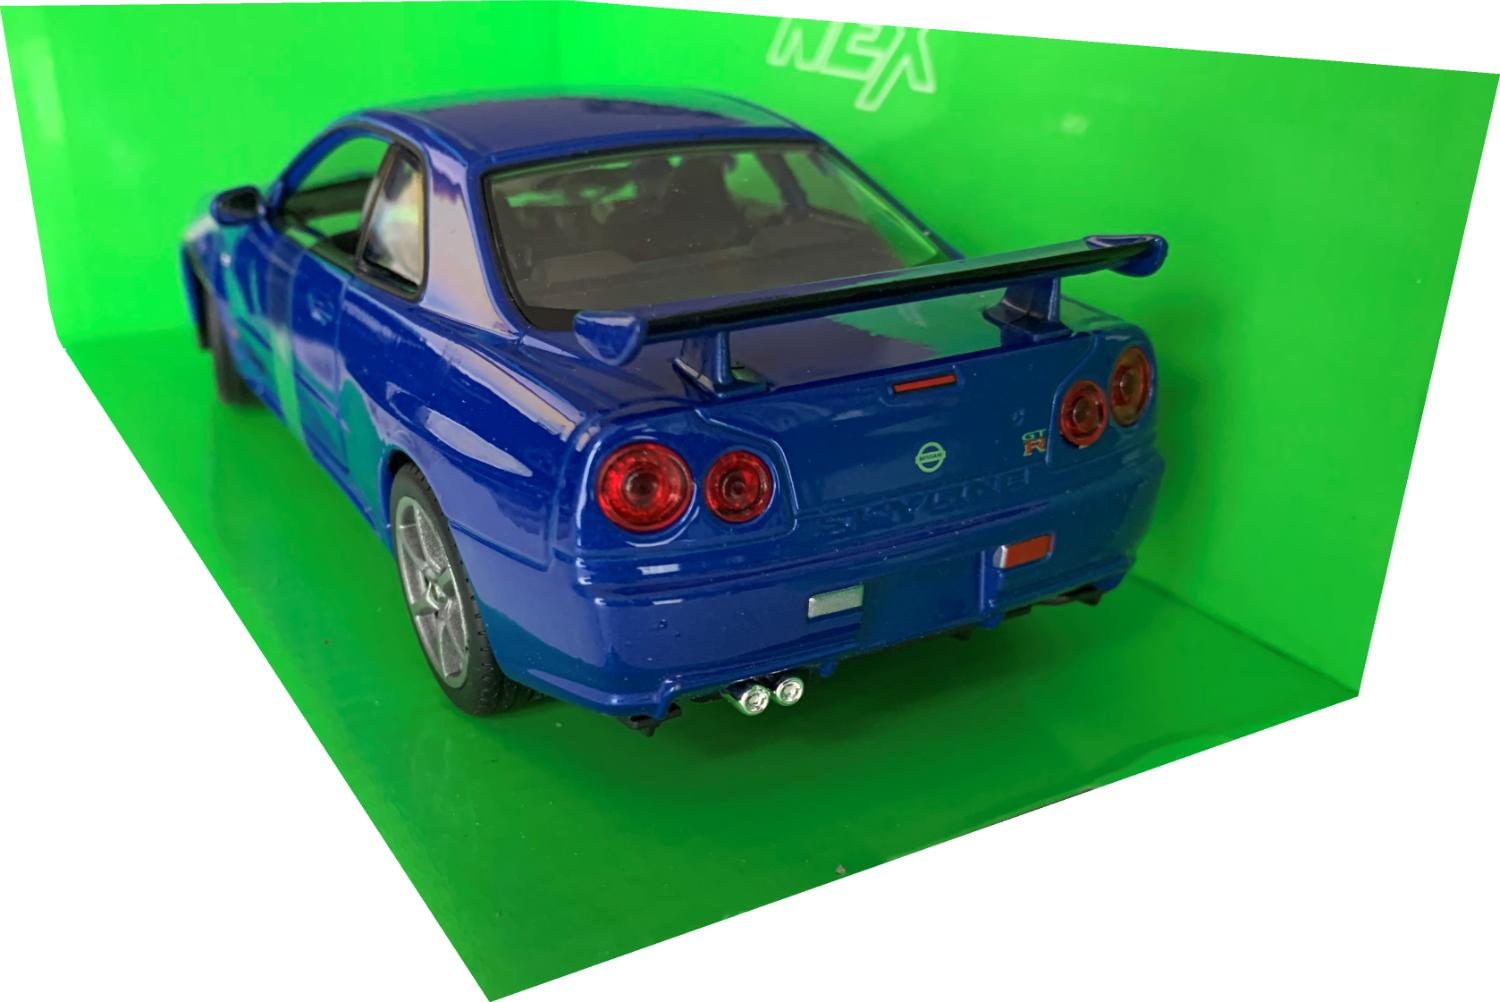 n excellent reproduction of the Nissan Skyline GT-R (34) with high level of detail throughout, all authentically recreated.